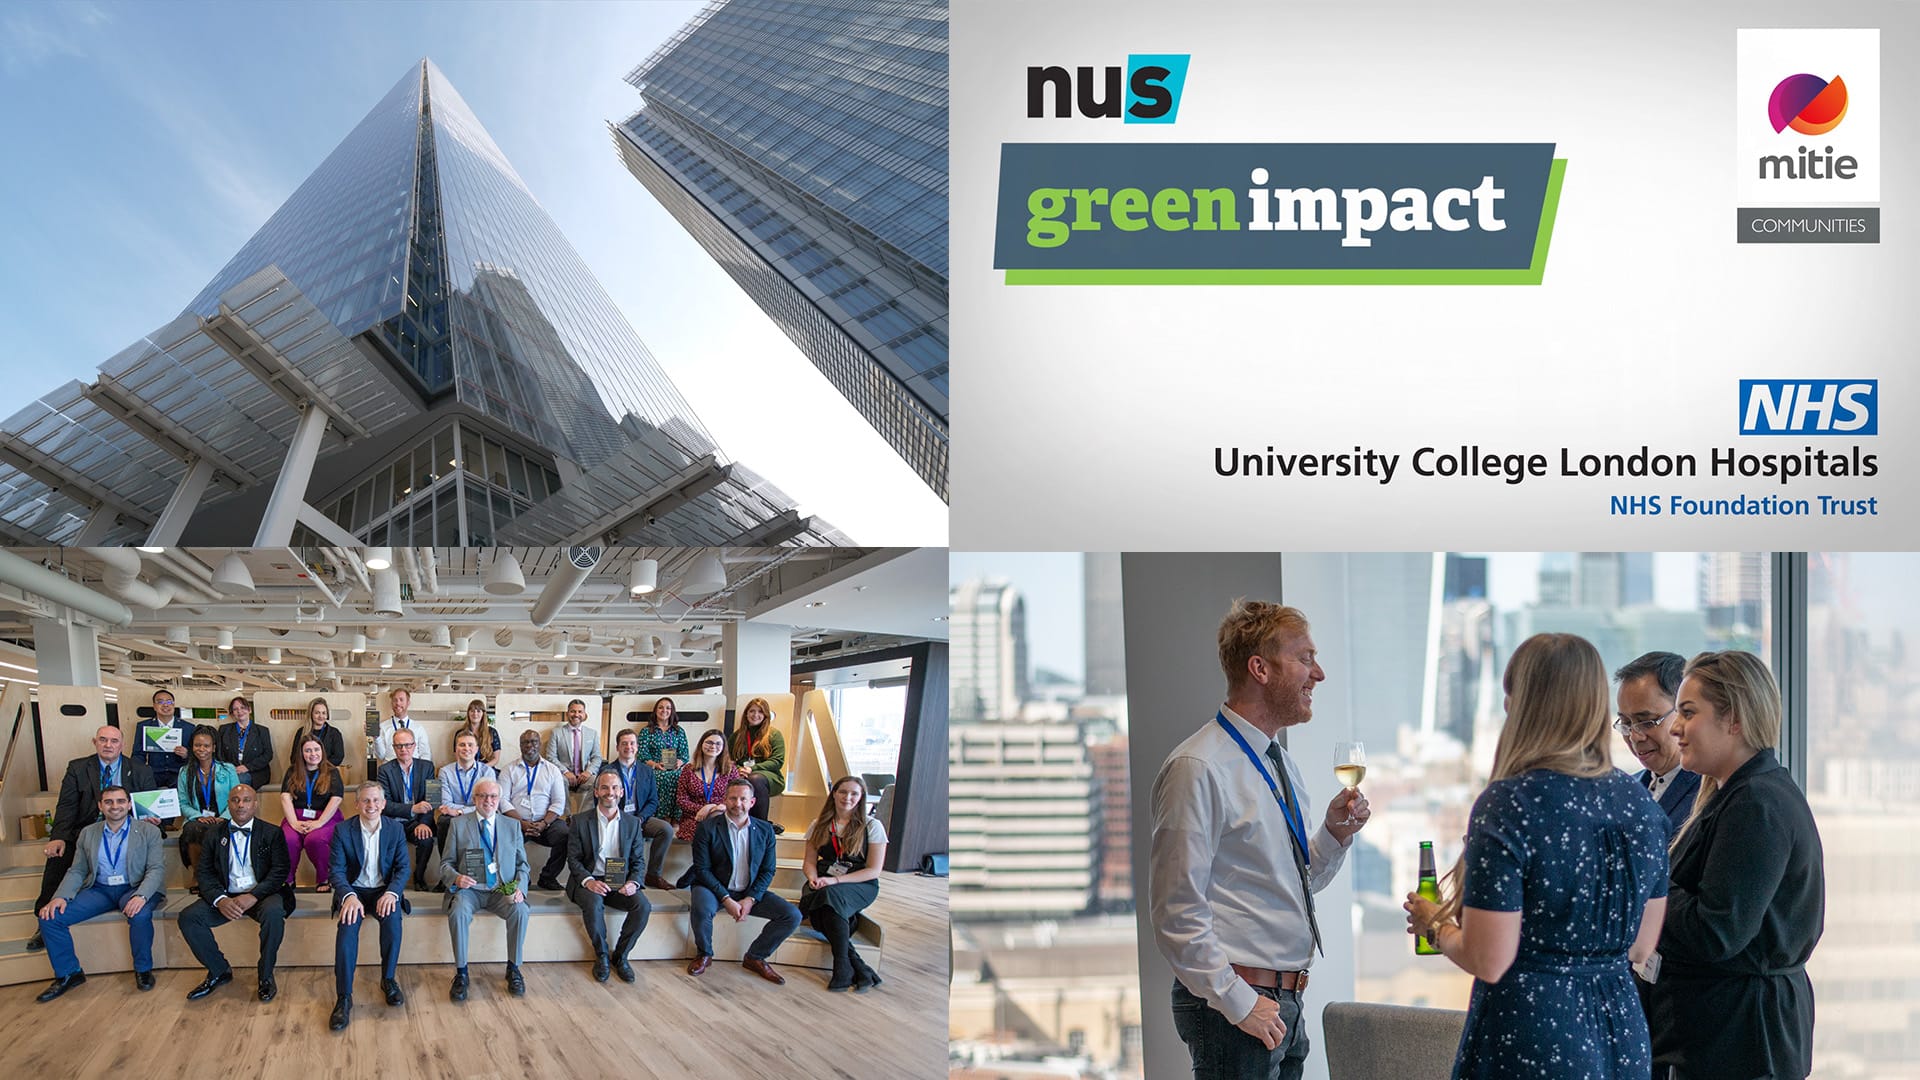 NHS and Mitie Green Impact Awards